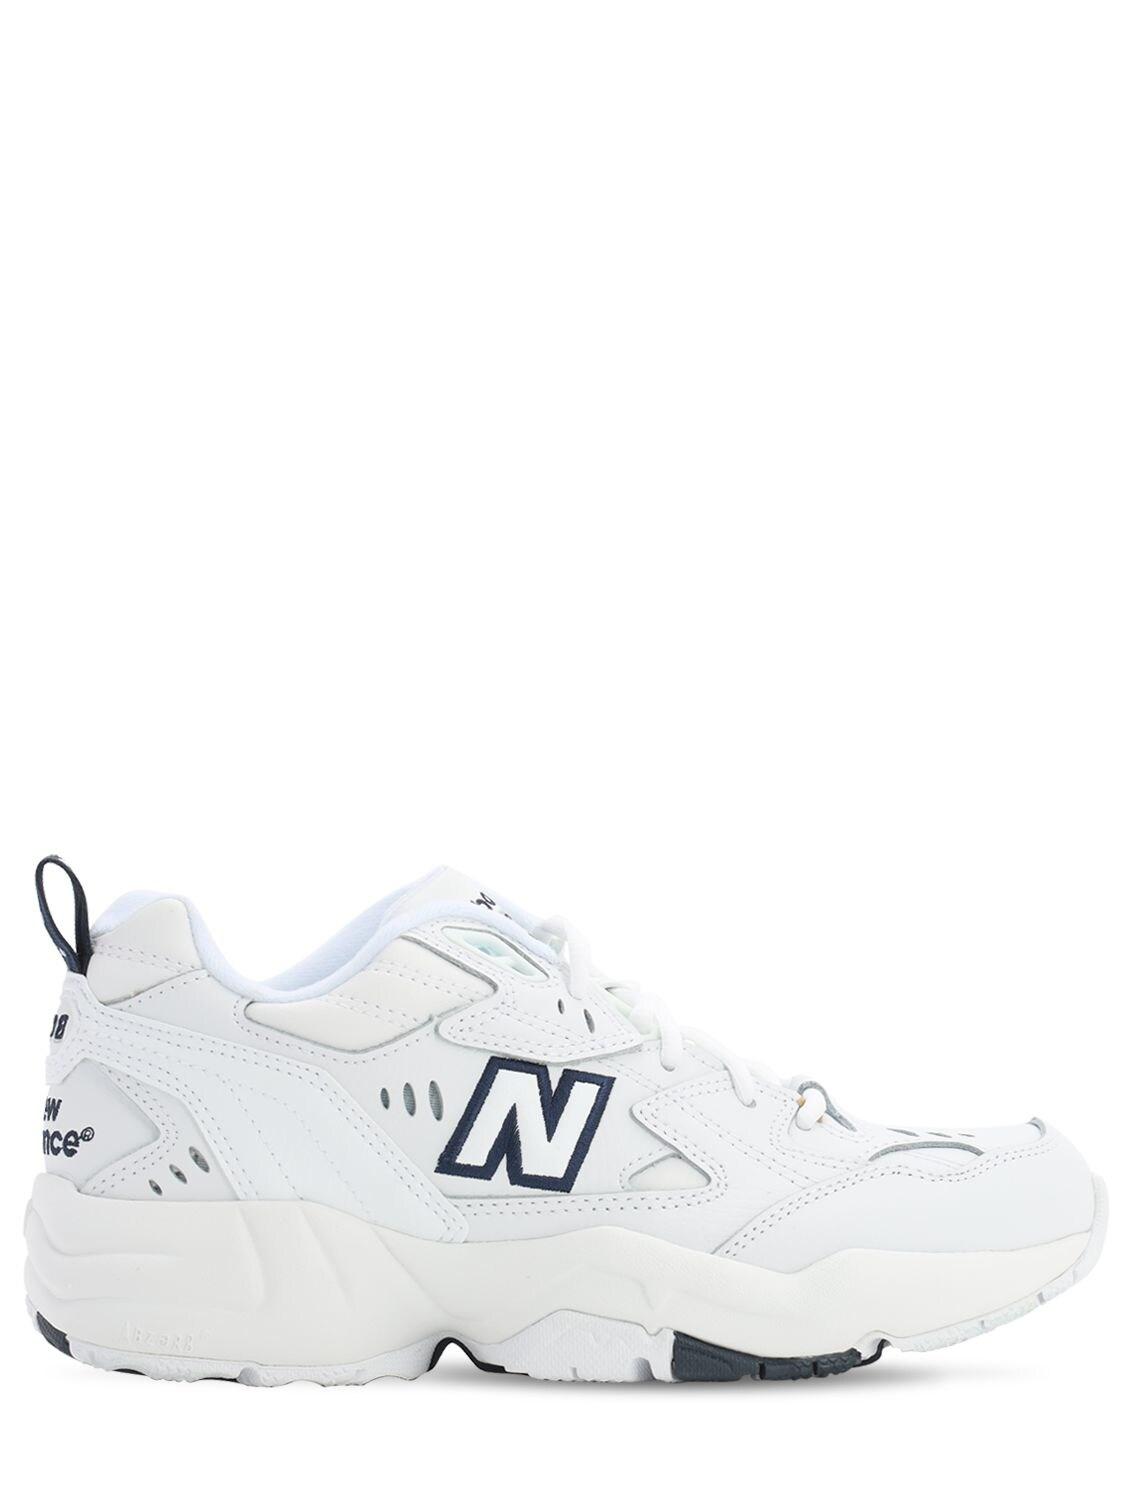 New Balance Leather 608 in White/Navy (White) - Lyst